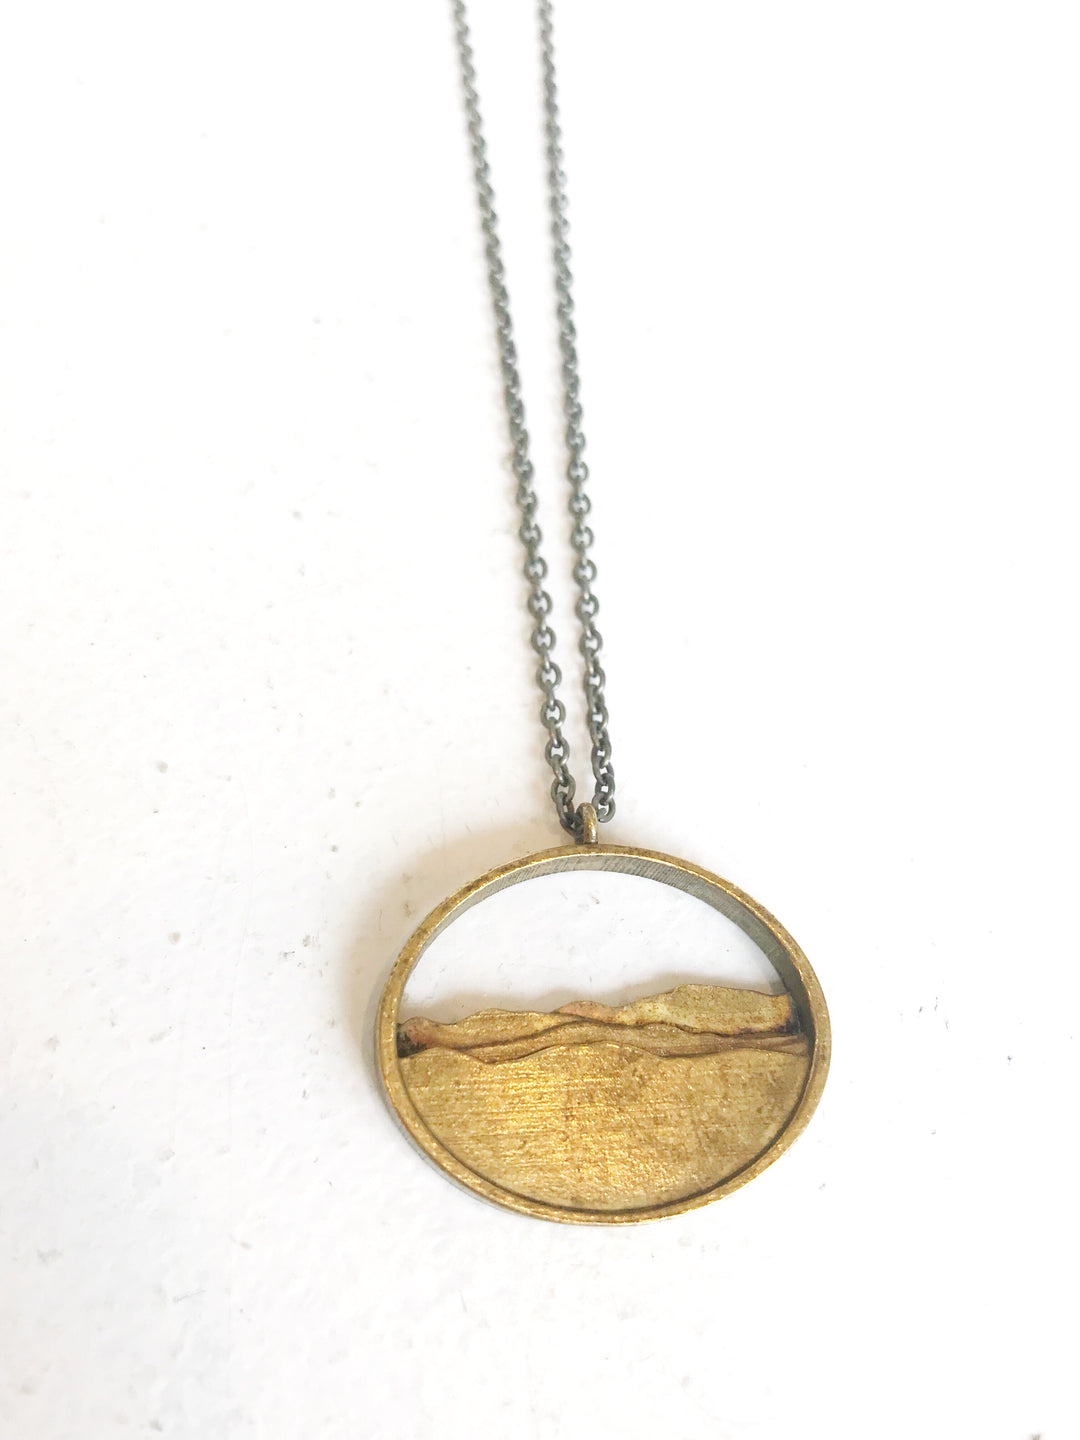 Adirondack Silhouette Necklace - Brass - Large